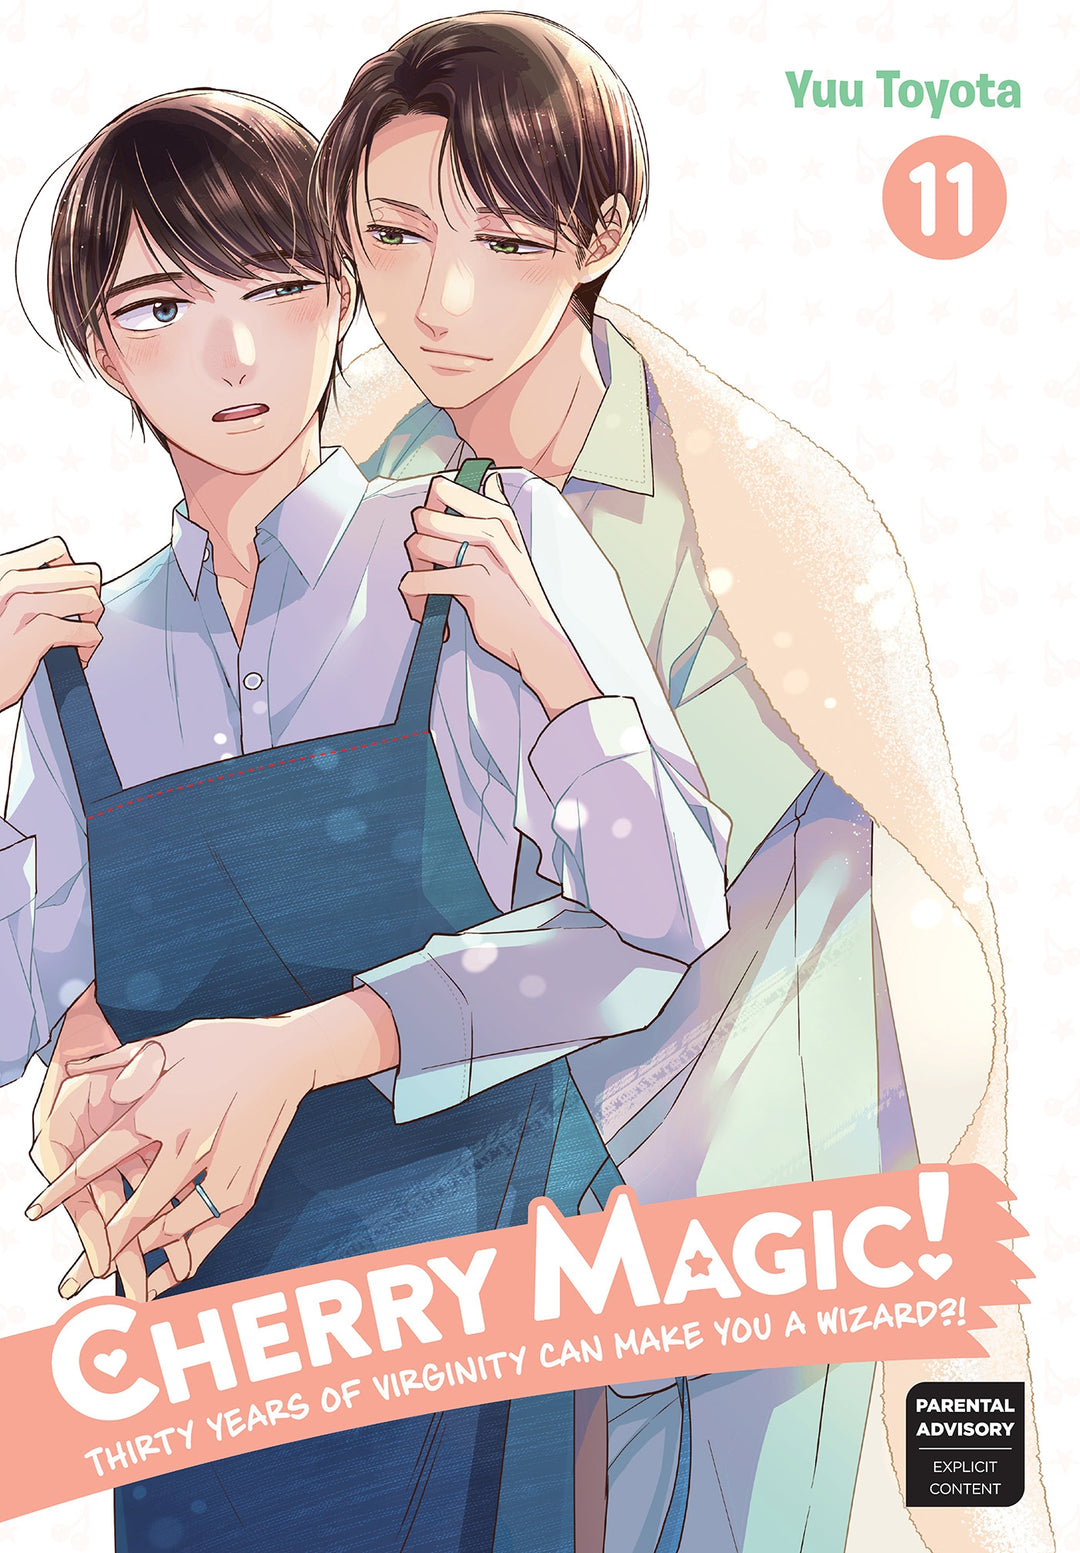 Cherry Magic! Thirty Years of Virginity Can Make You a Wizard?!, Vol. 11